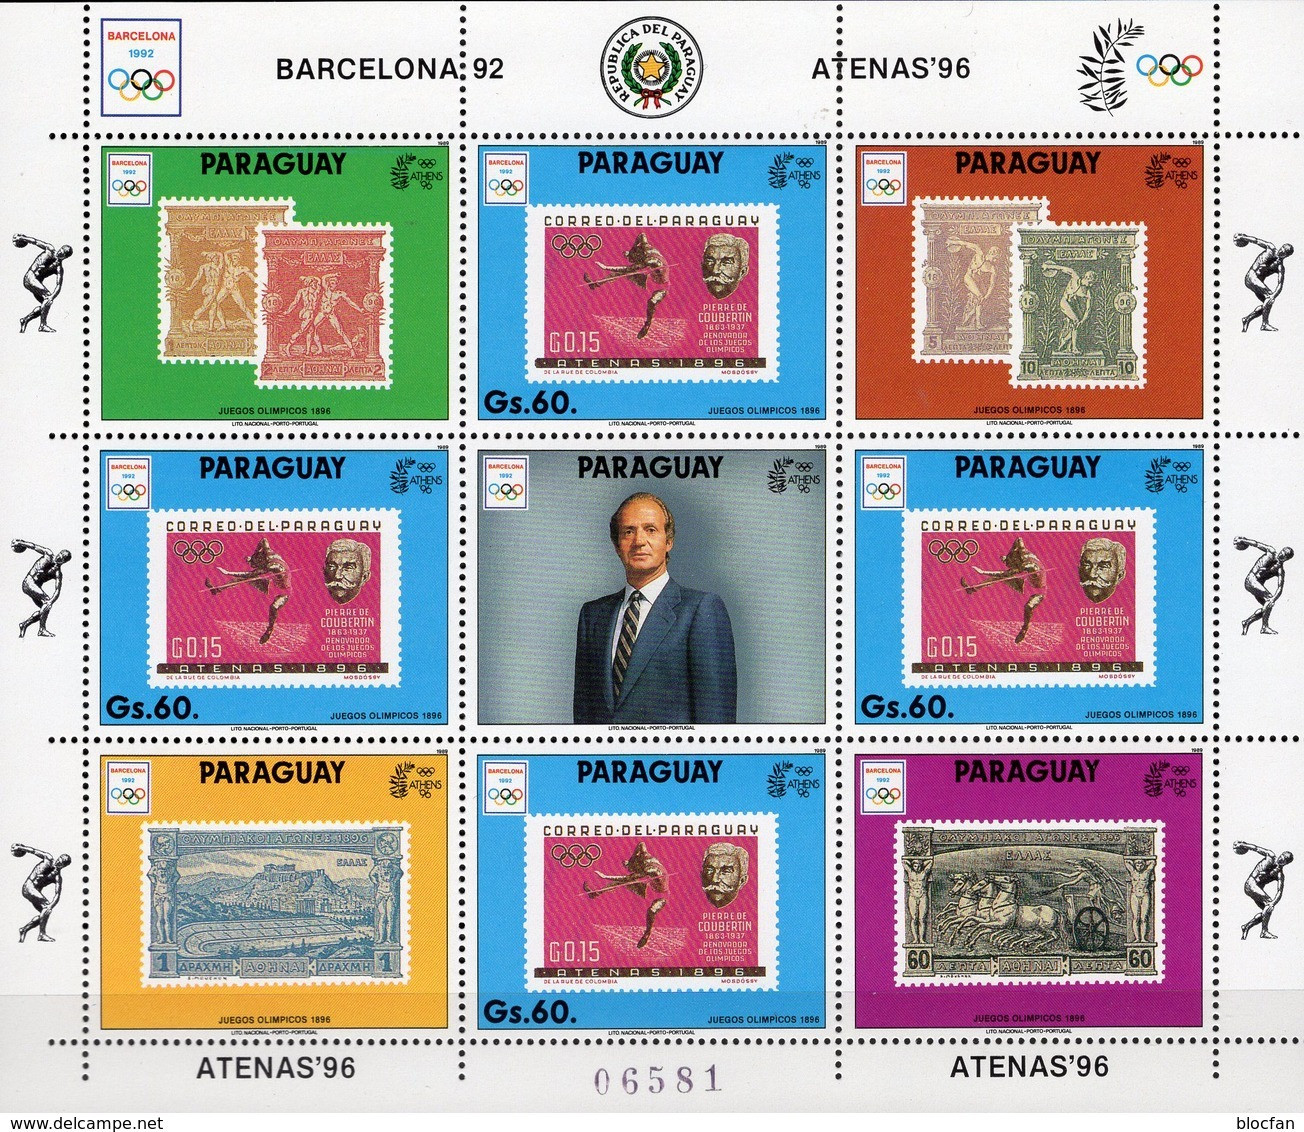 Olympia Athen 1896 Paraguay 4449 9-KB ** 36€ Barcelona 1992 Stamp On Stamps M/s Hoja Bloc Sheet Ss Sheetlet Bf Olympics - Ete 1896: Athènes